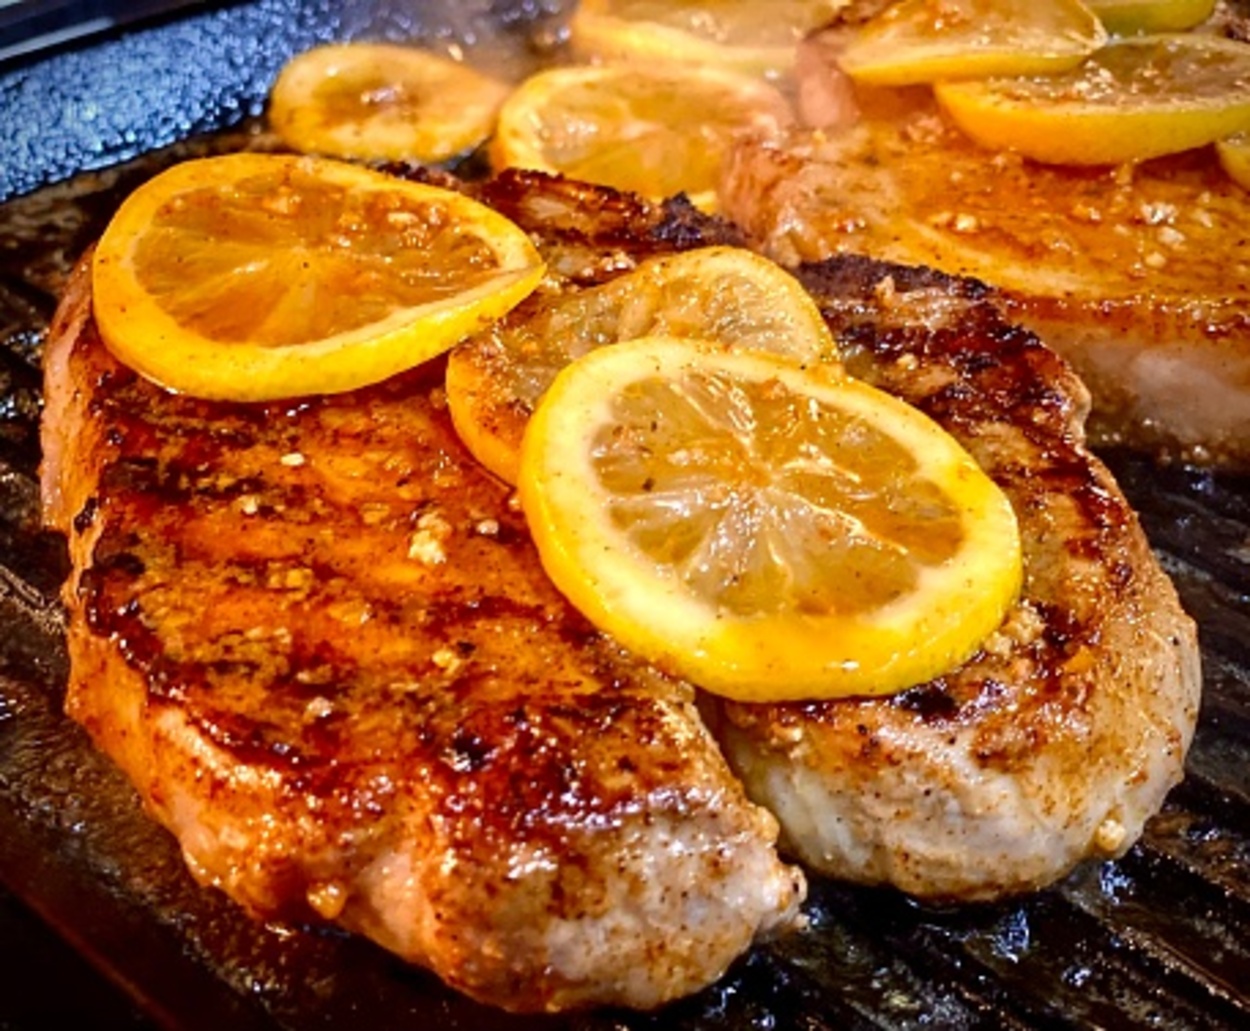 Air fried pork chops topped with lemon slices